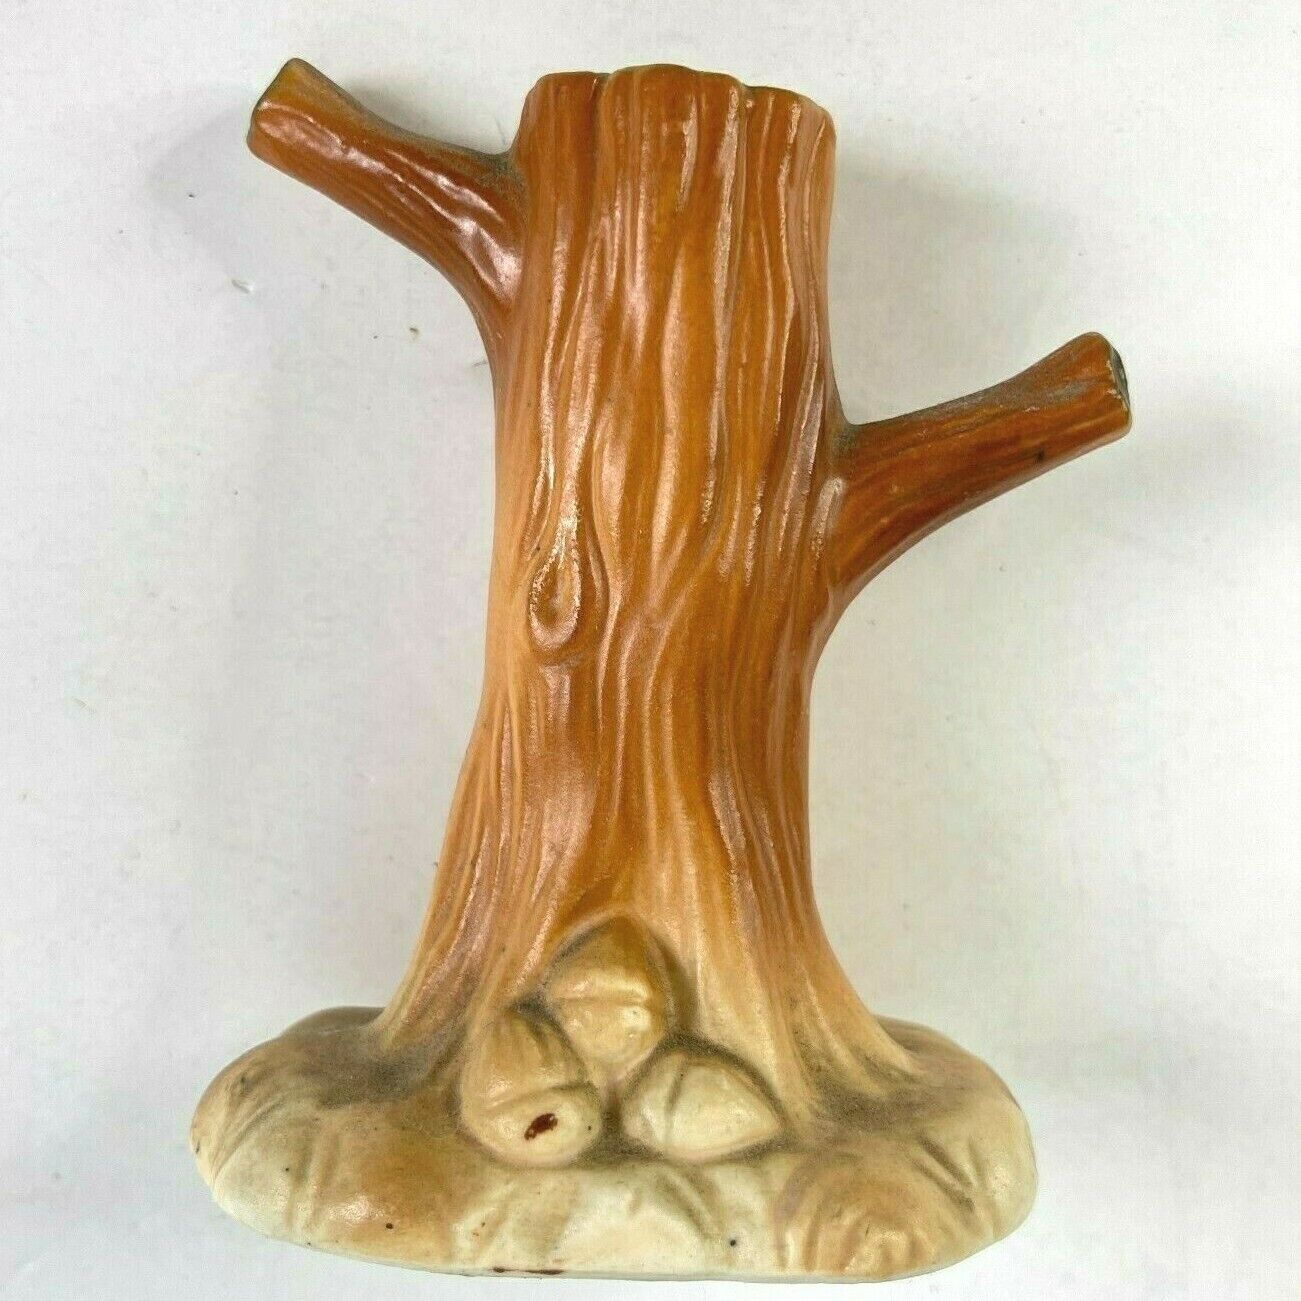 Vintage Tree Trunk Bradley Exclusives Japan Ring Holder from Acorn S&P Set Stand